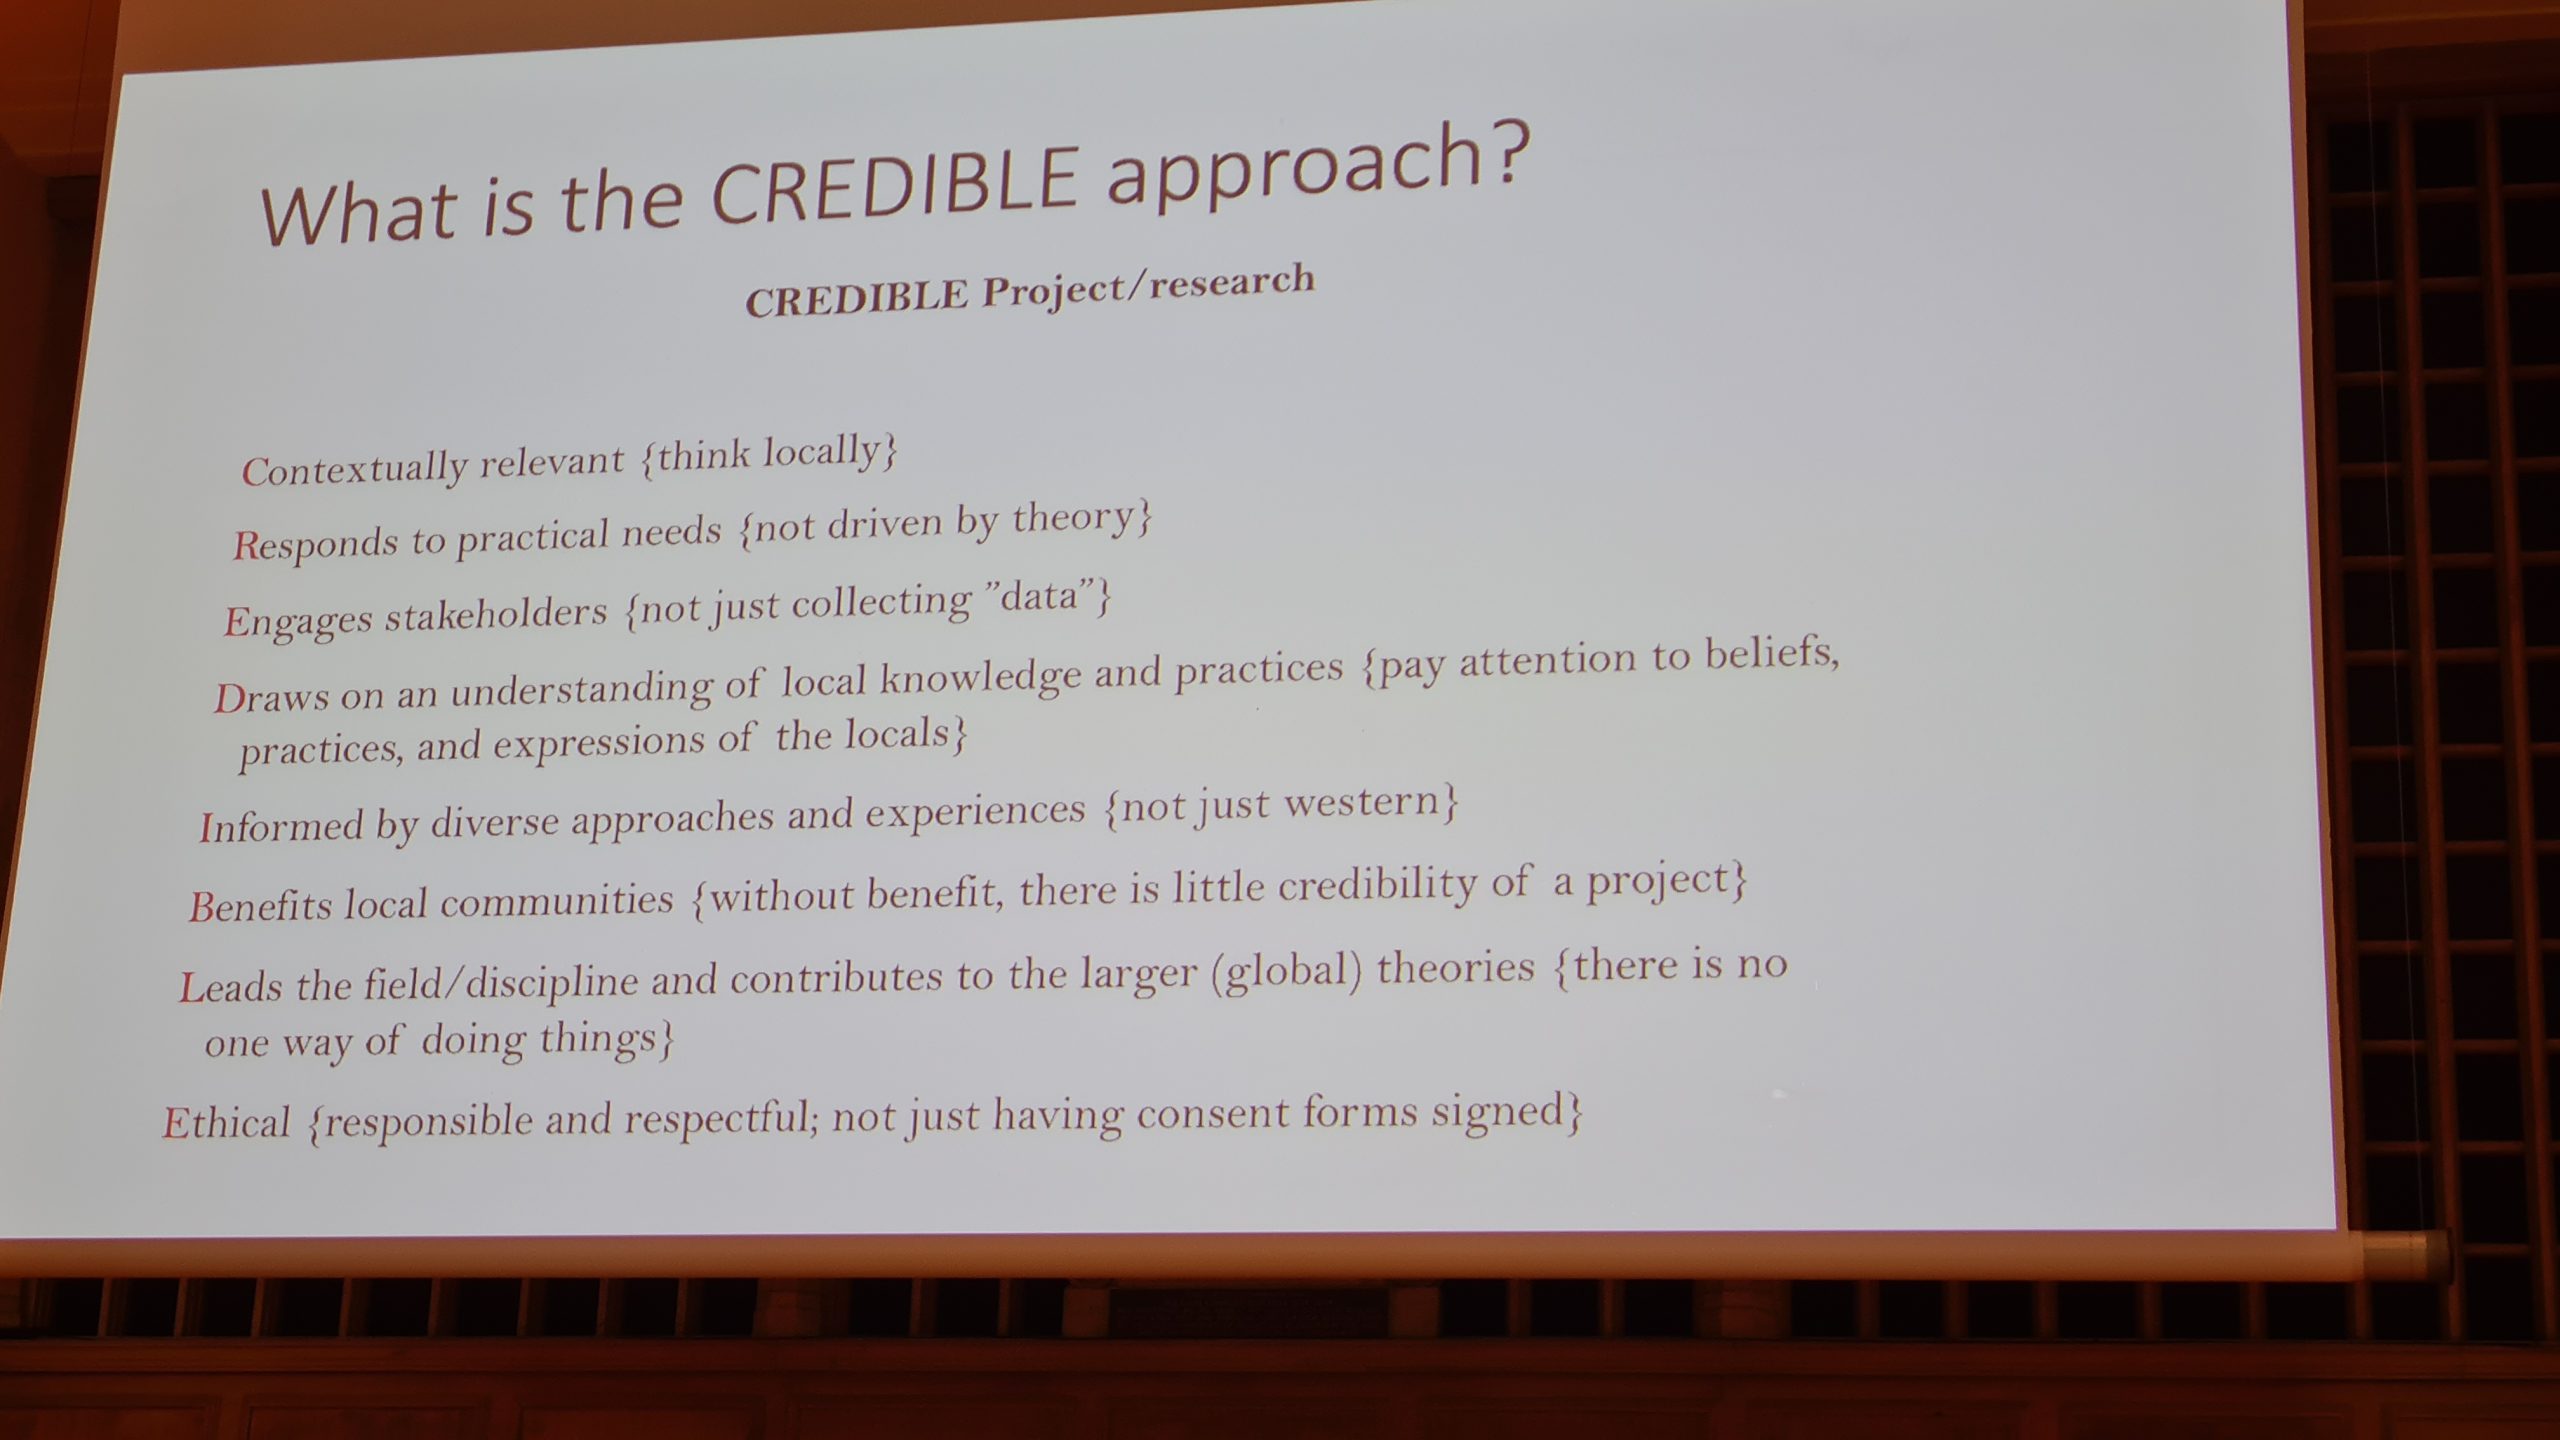 CREDIBLE stands for: Contextually relevant. Responds to practical needs. Engages stakeholders. Draws on an understanding of local knowledge and practices. Informed by diverse approaches and experiences. Benefits local communities. Leads the field/discipline and contributes to the larger (global) theories. Ethical.